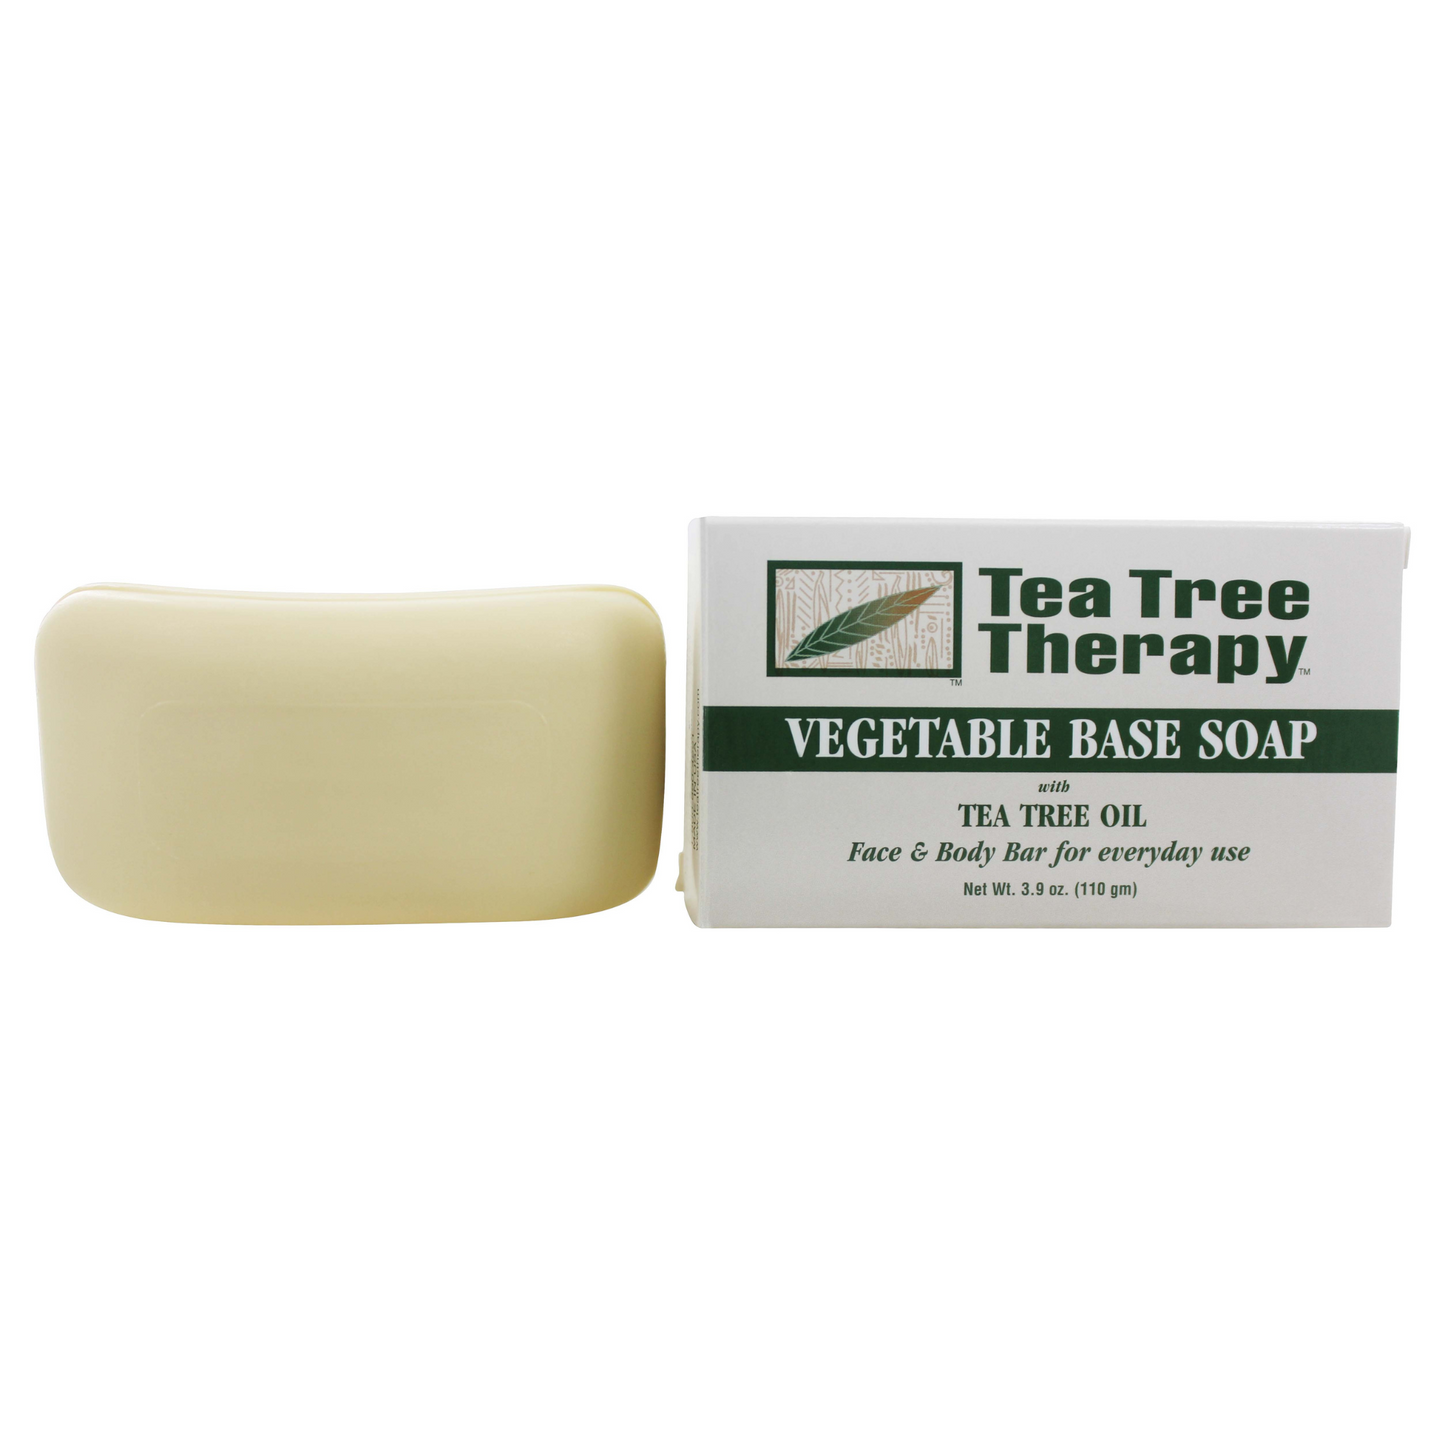 Primary Image of Tea Tree Therapy Vegetable Base Soap (3.9 oz) 